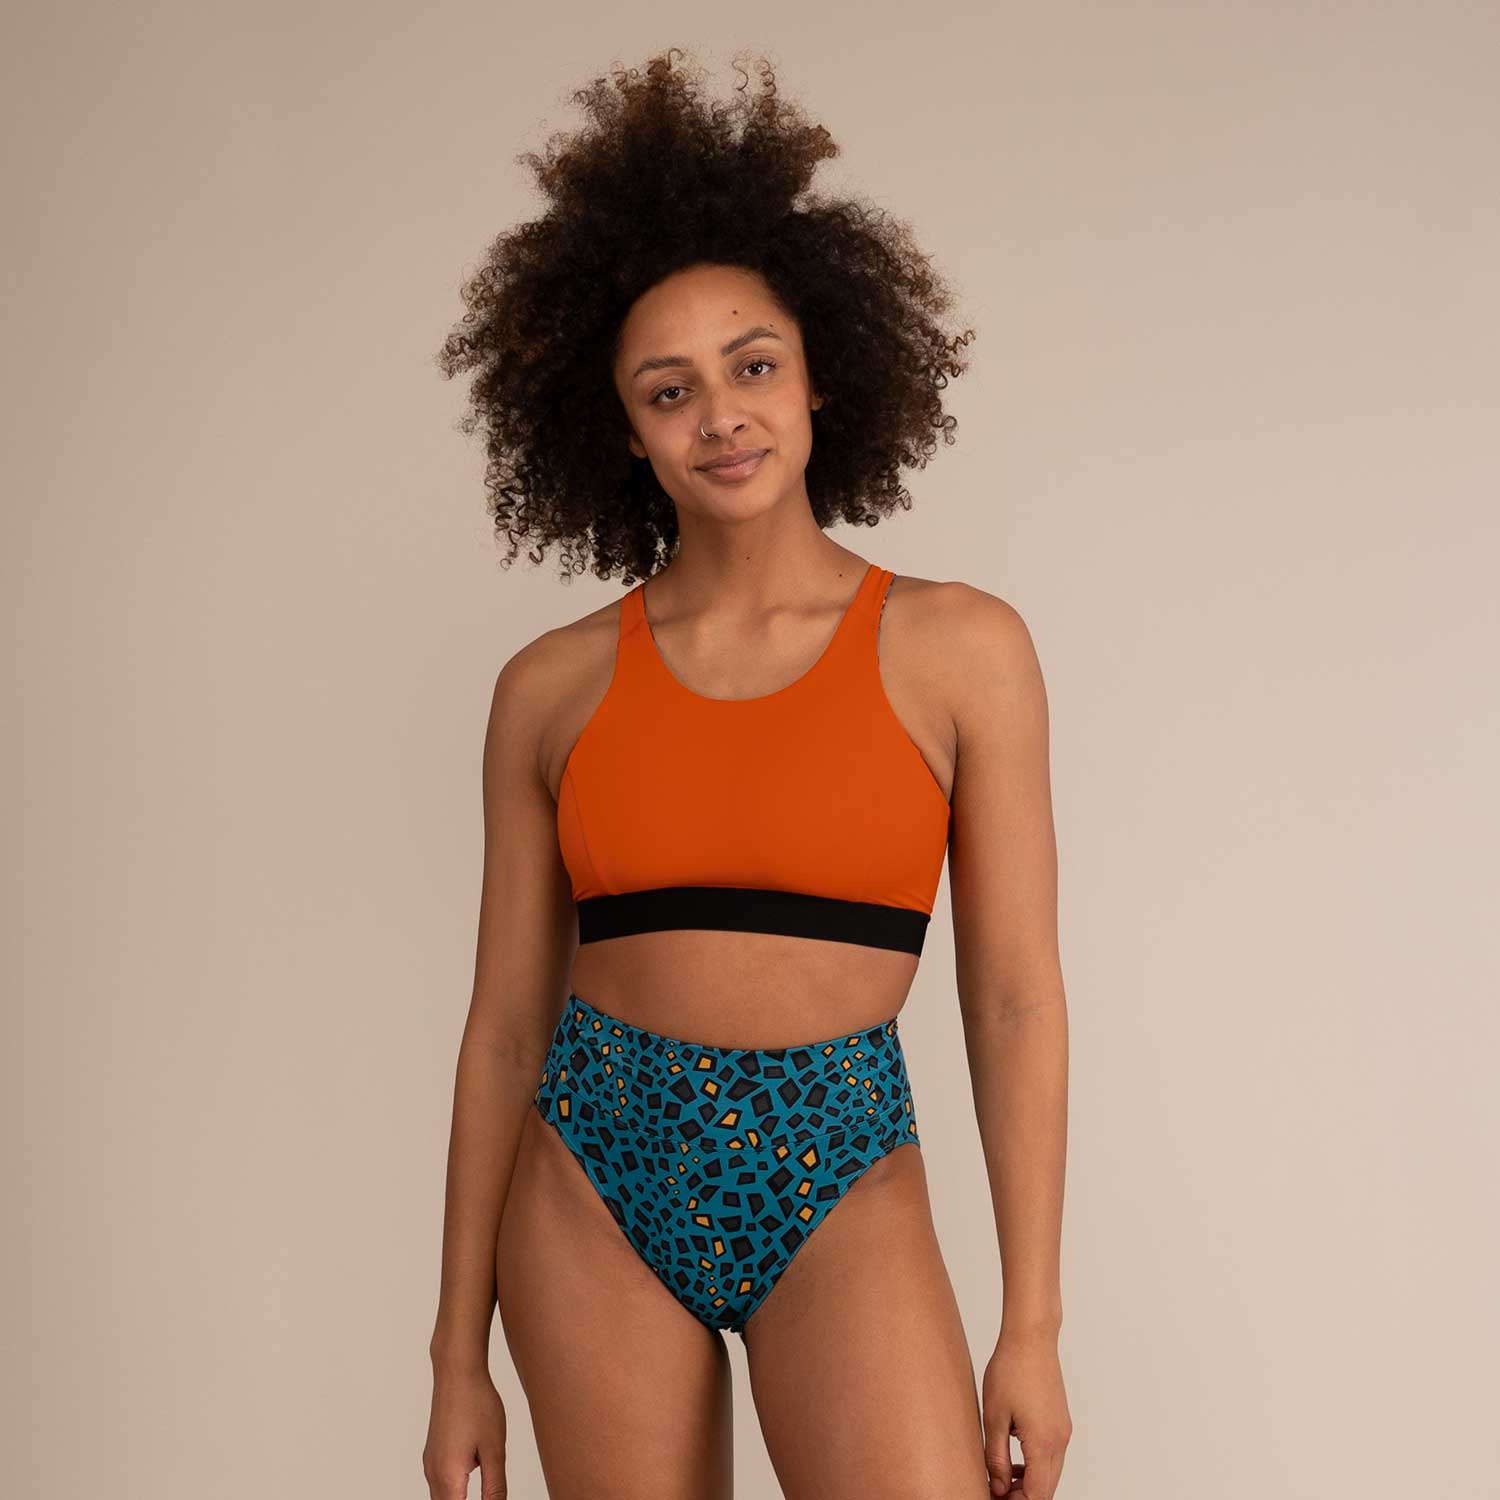 TIDE MINIMAL REPTILE | High Cut Recycled Bikini Bottoms | 3RD ROCK Clothing -  Kendal is 5ft 7 with a 28" waist, 38" hips and wears a size 12 F